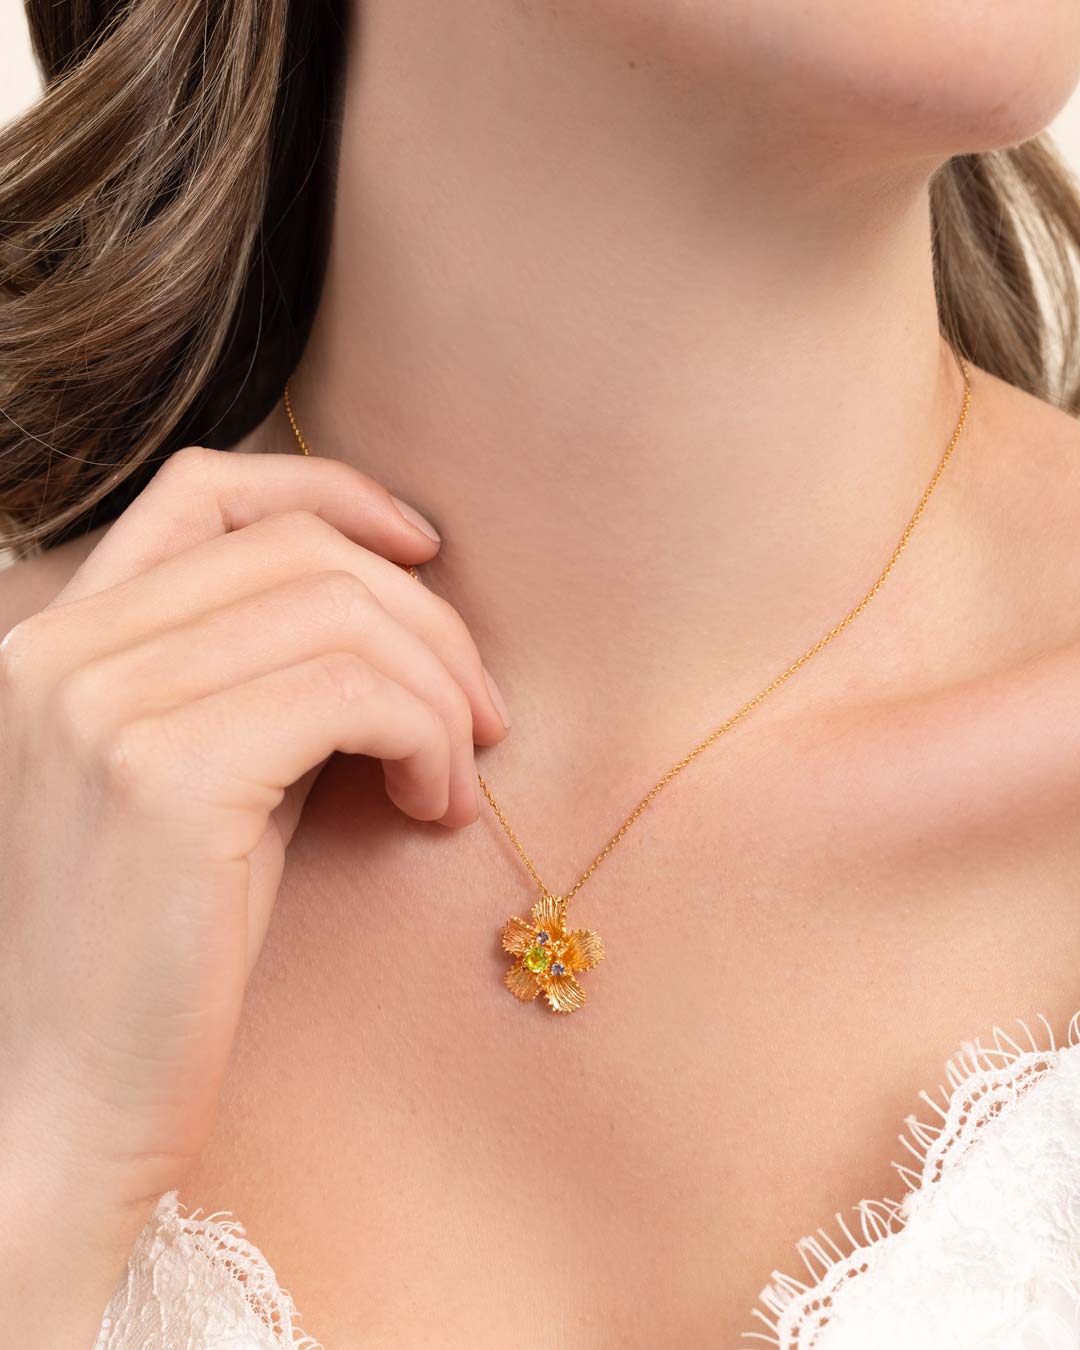 925 GOLD PLATED PERIDOT CITRINE IOLITE FACETED FLOWER NECKLACE